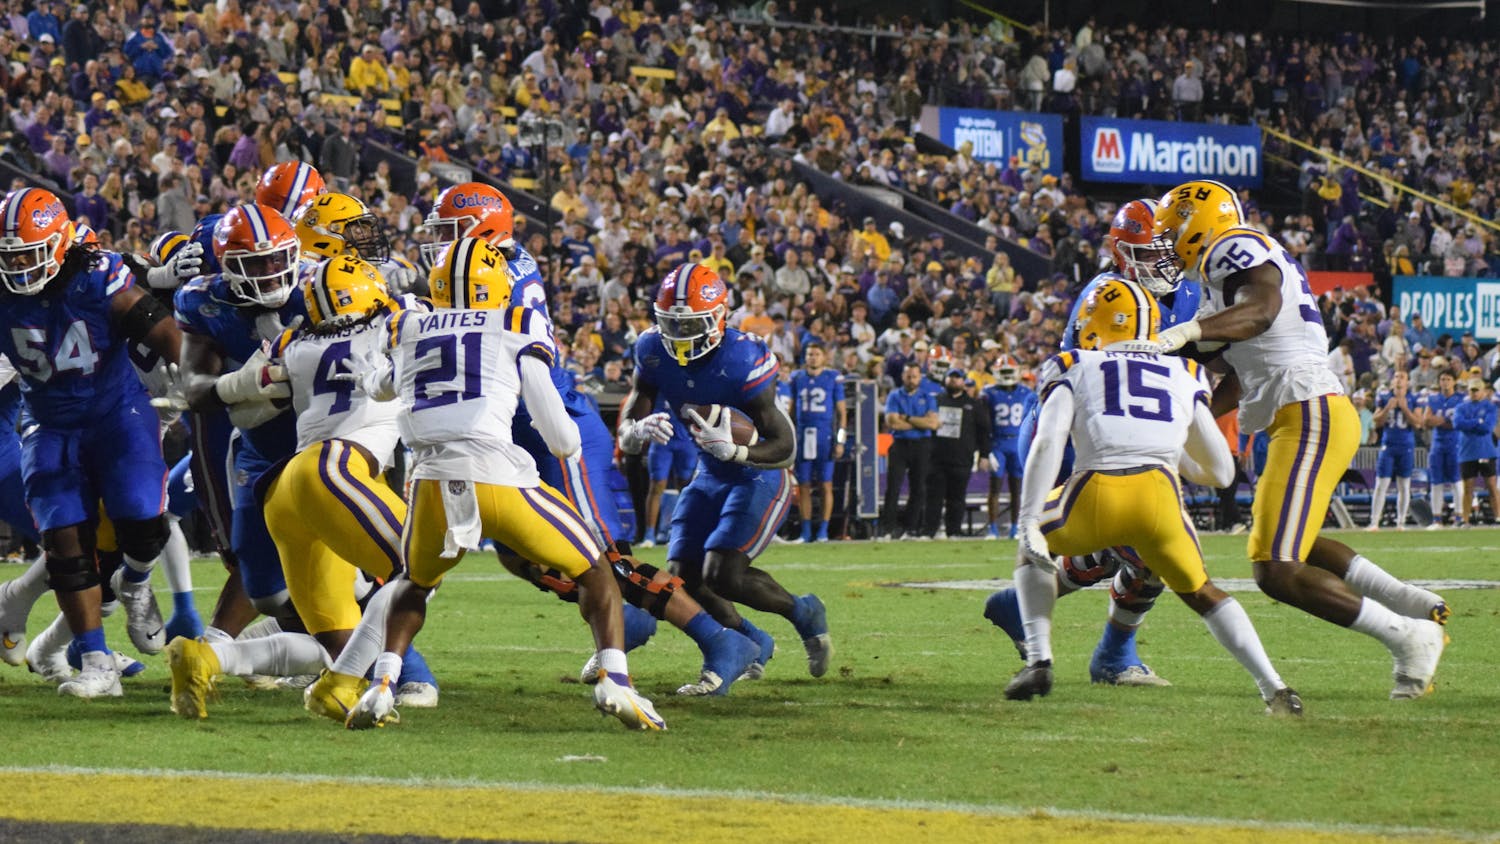 Junior running back Montrell Johnson Jr. runs toward the endzone in the Gators’ 52-35 loss to the LSU Tigers on Saturday, Nov. 11, 2023 in Baton Rouge, La. Florida fell to 5-5 on the season after the loss. The last time UF had three consecutive losing seasons was from 1945 to 1947. 